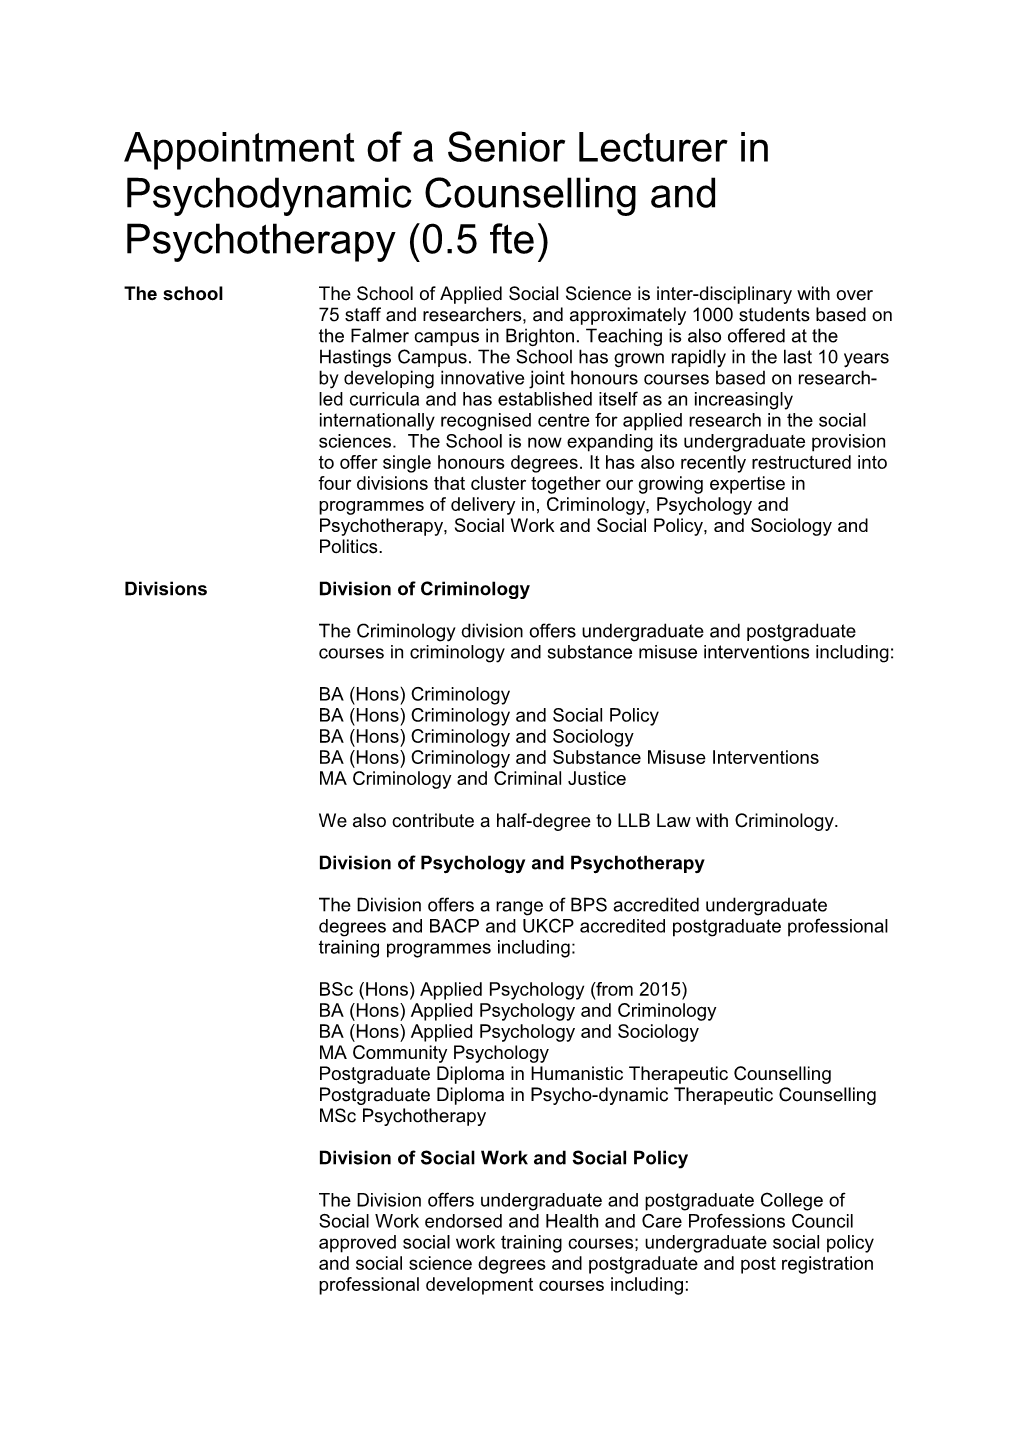 Appointment of a Senior Lecturer in Psychodynamic Counselling and Psychotherapy (0.5 Fte)